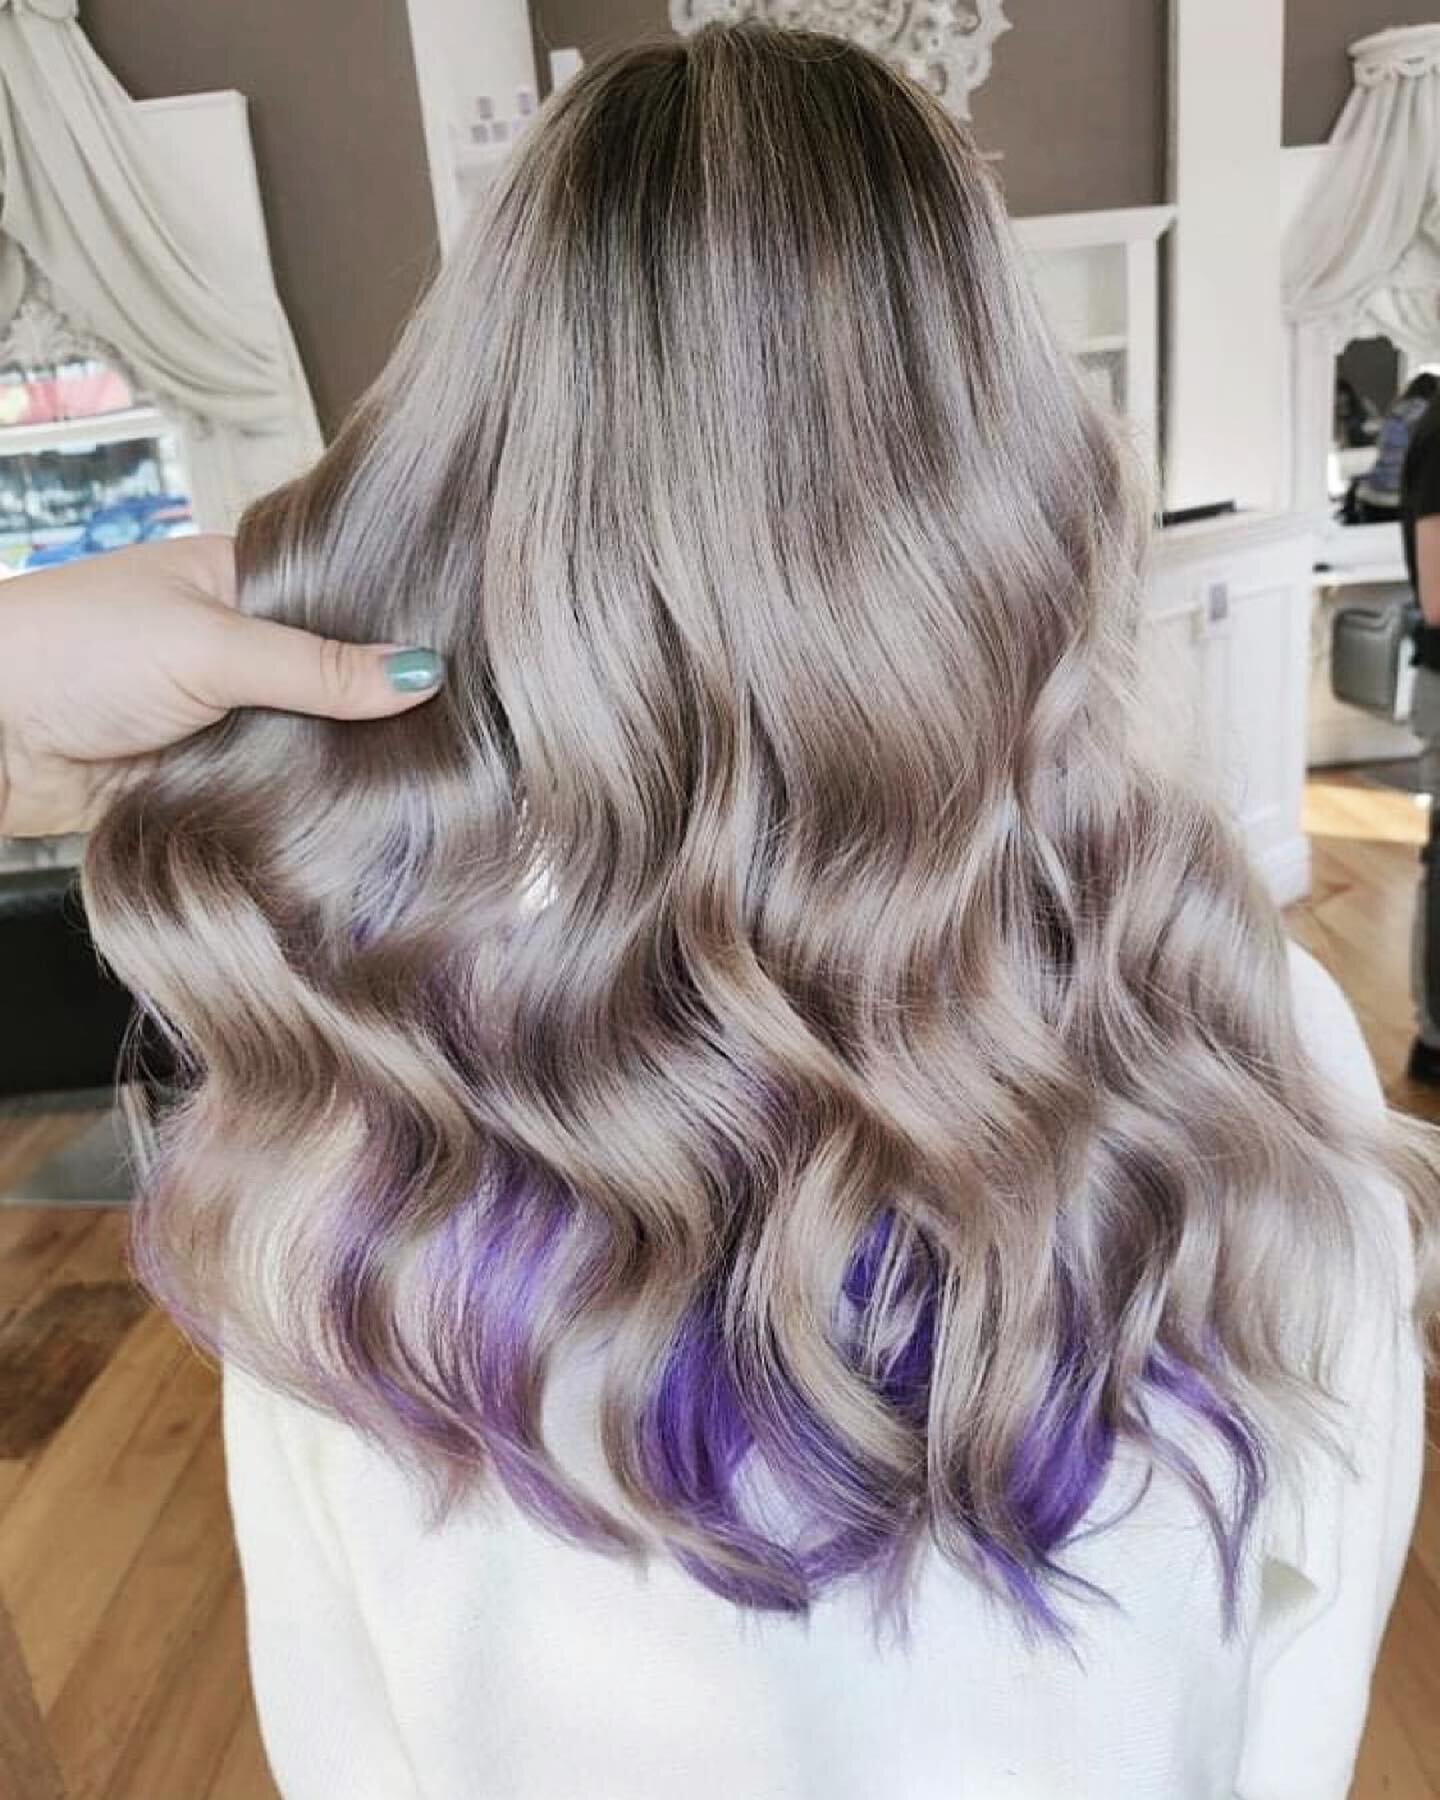 💥YES YES YES!💥

Blended creamy foilayage with a touch of purple to &lsquo;pop&rsquo;! Swipe for before 👉🏻

Link in bio to book your new look 💁&zwj;♀️
.
.
. @jazzn_lavilla 
.
.
#hair #makeup #haircut #beautiful #fashionaddict #outfitoftheday #hai